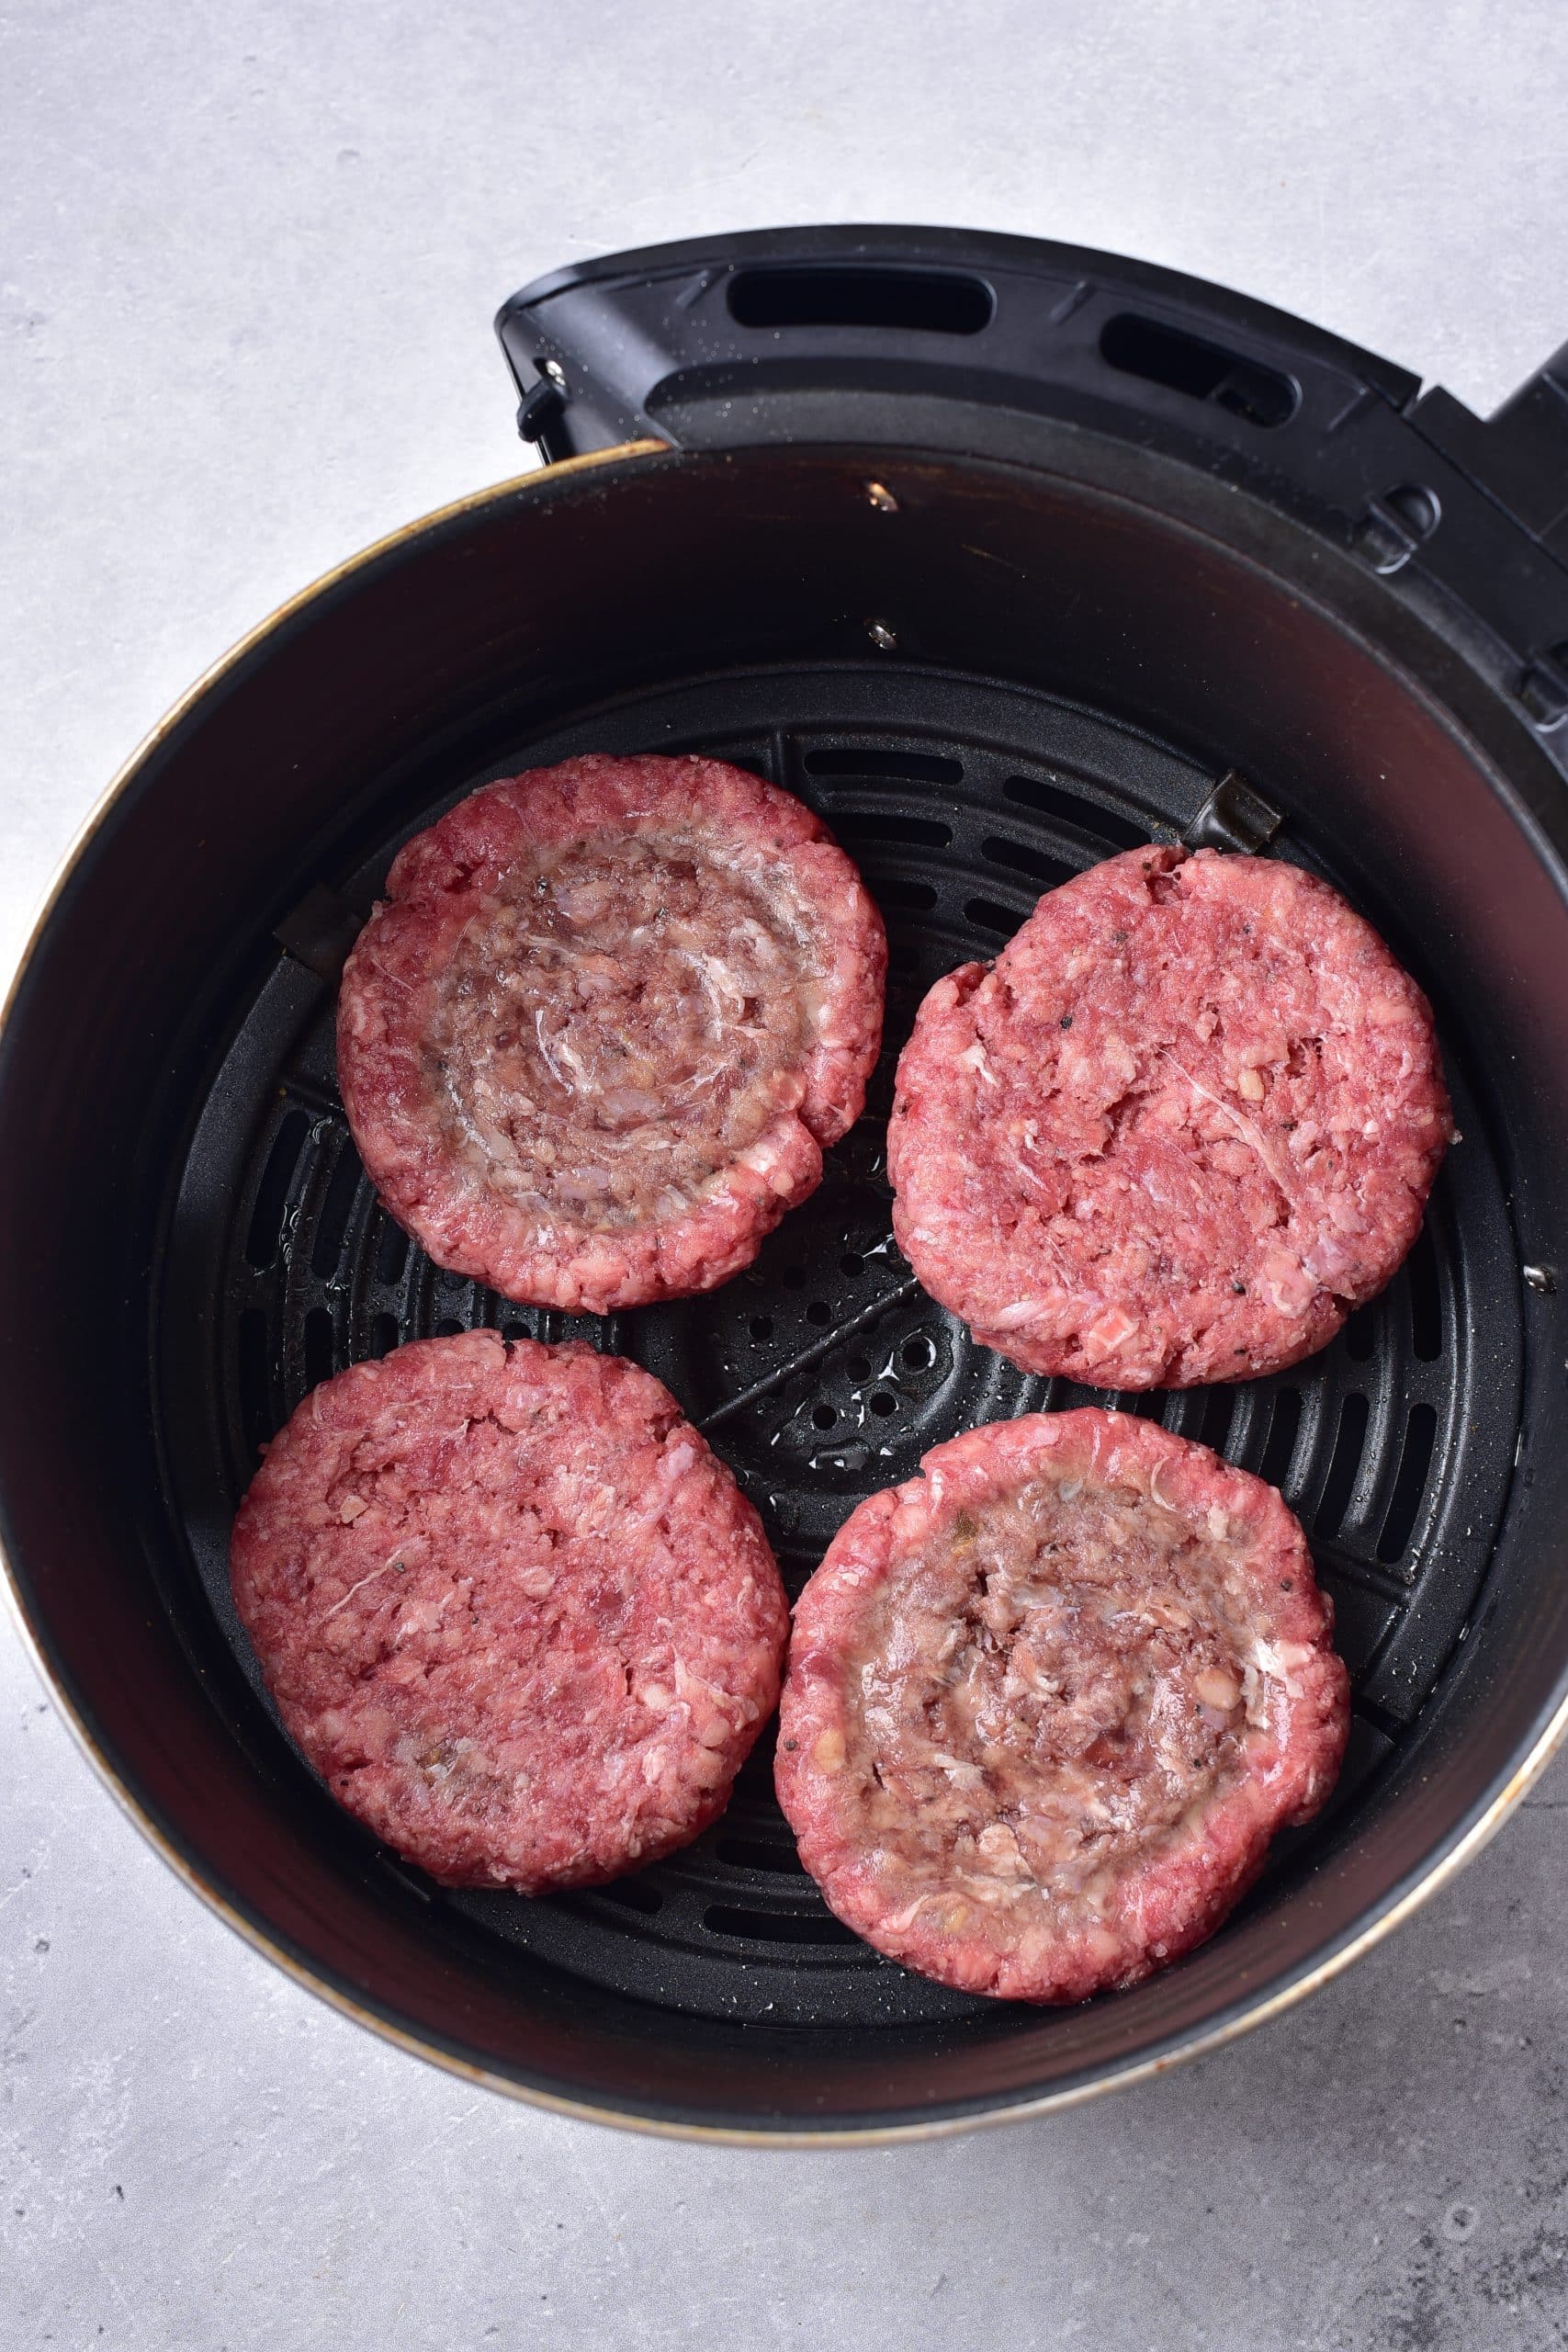 four raw hamburger patties in the basket of an air fryer